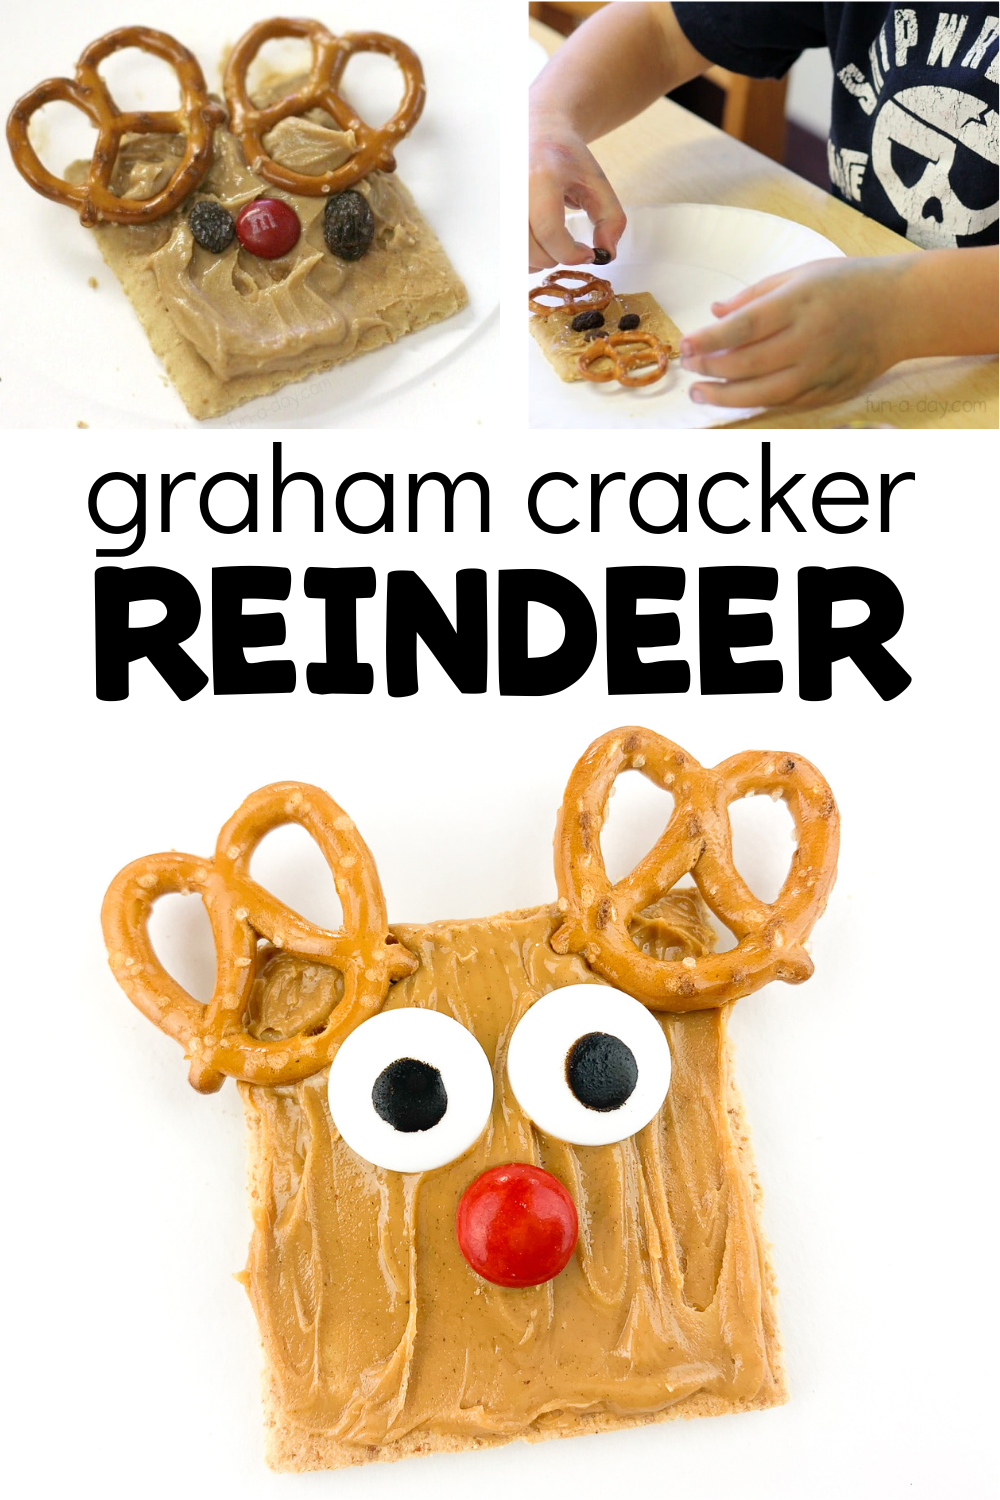 child and 2 versions of reindeer graham cracker snack with text that reads graham cracker reindeer